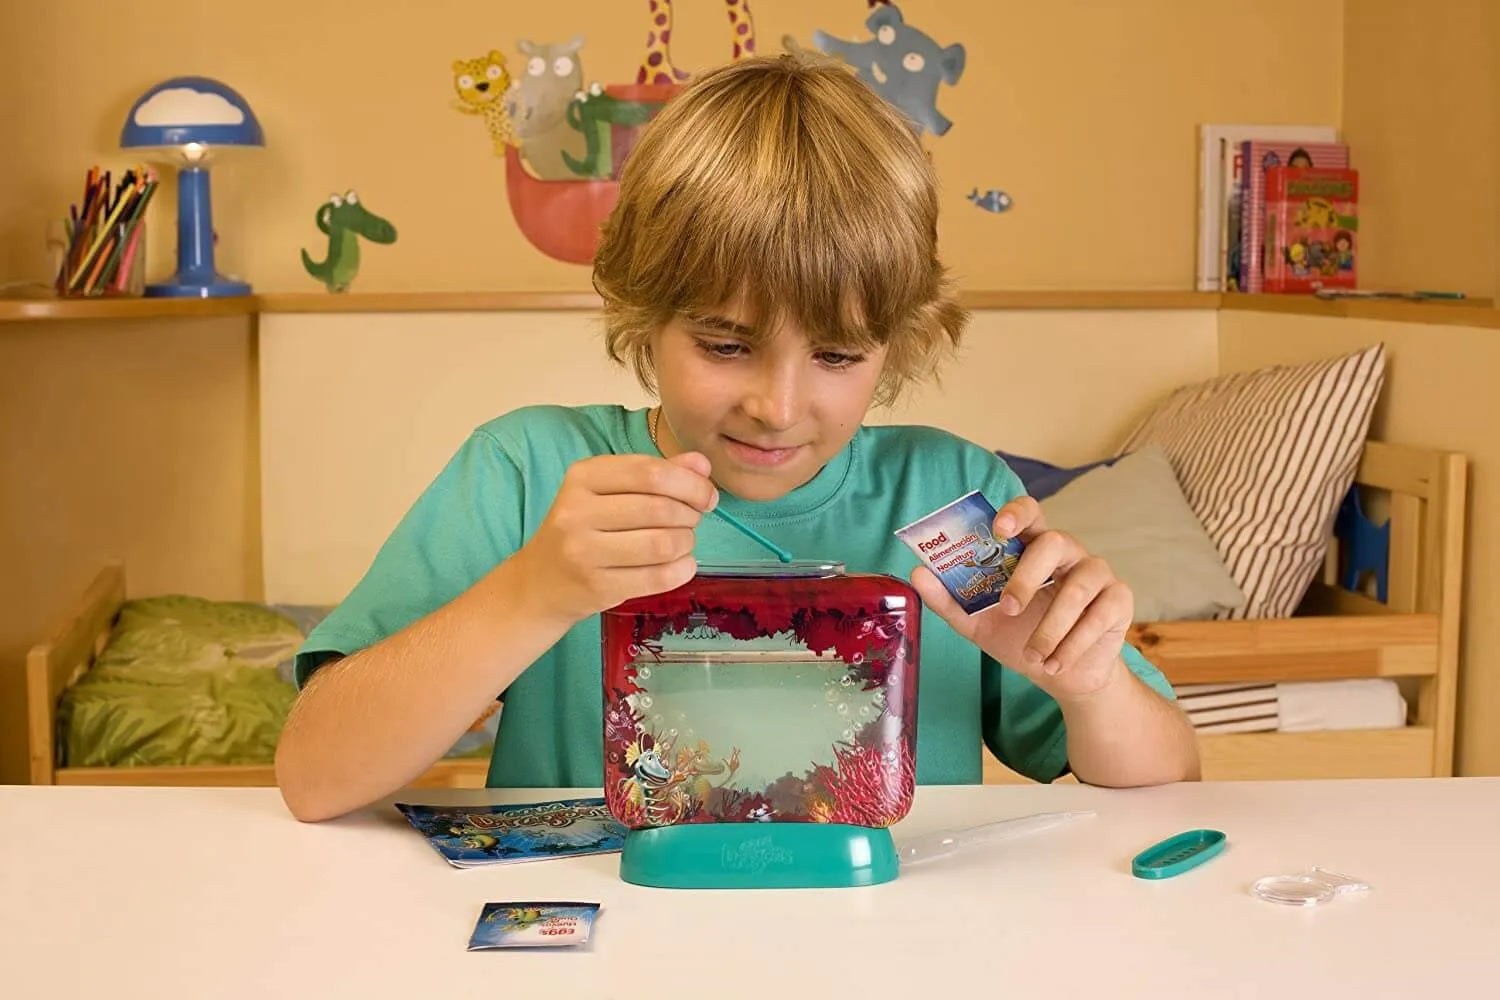 Boy playing with the Aqua Dragons science toy